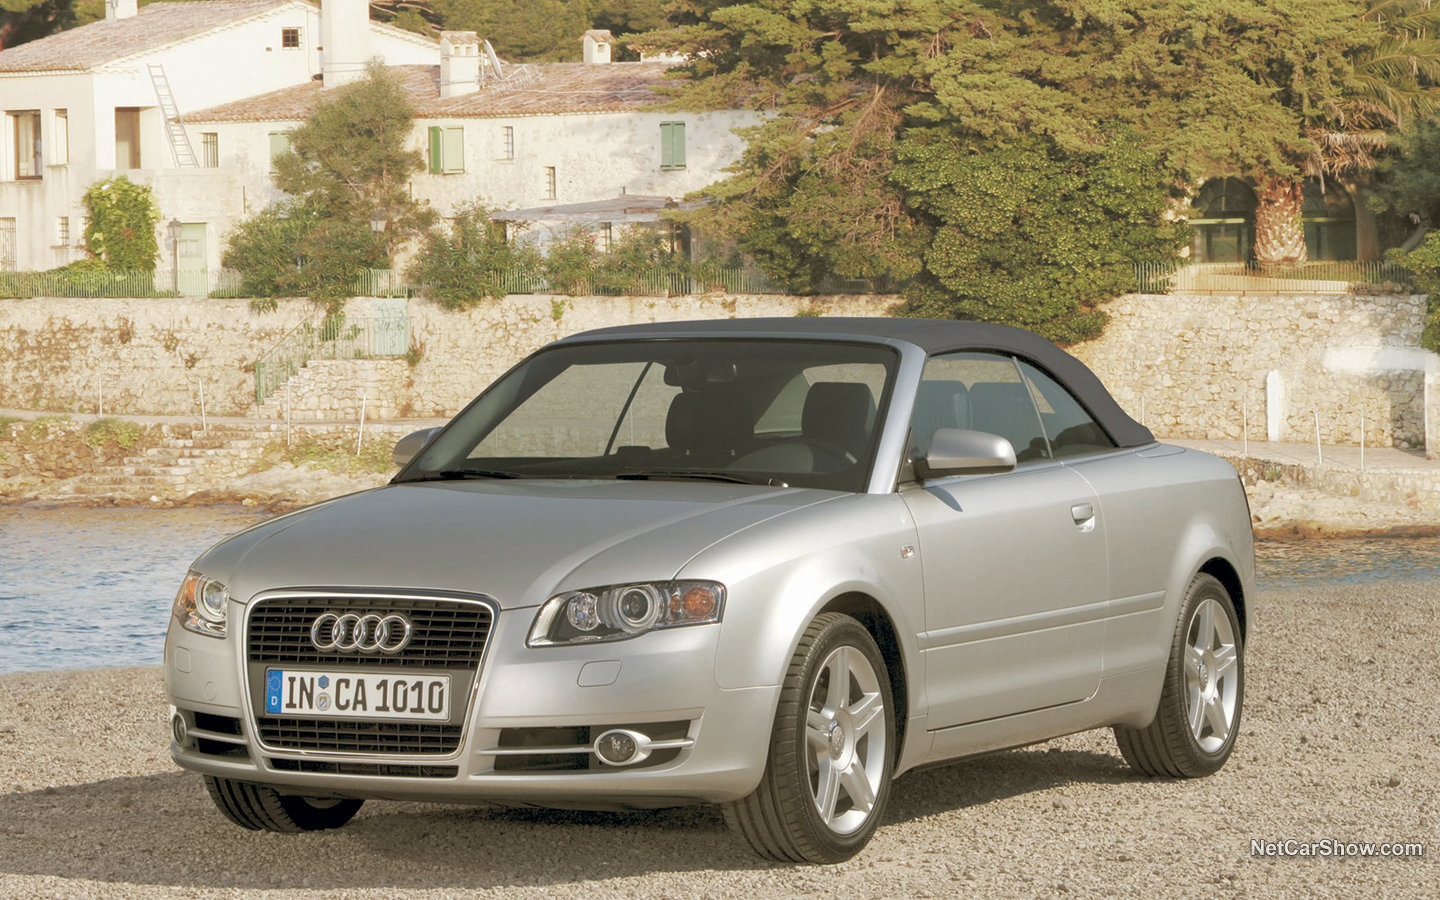 Audi A4 Cabriolet 2006 6f9be121